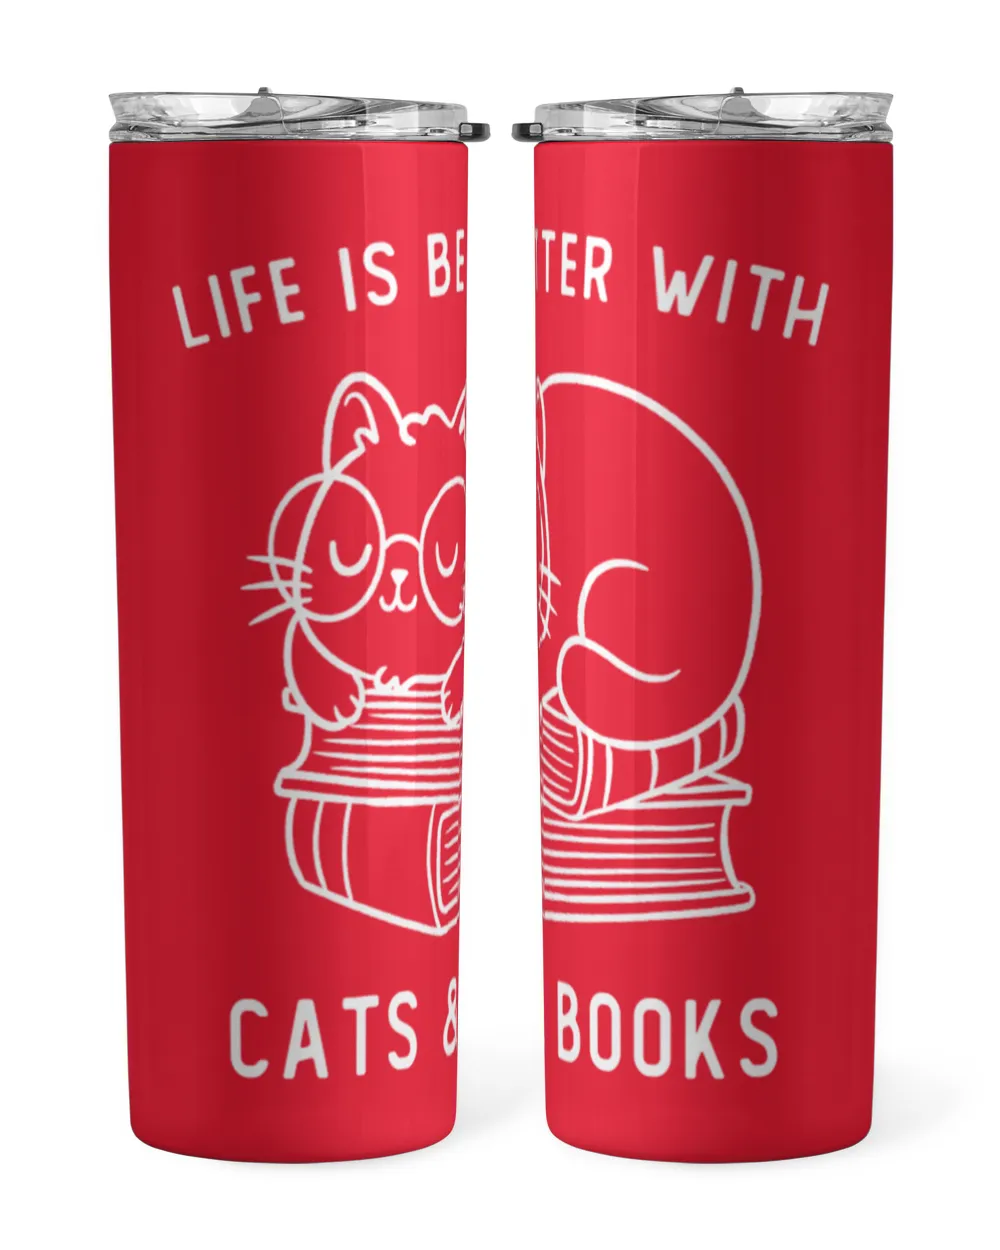 Cats And Books Life Is Better With Cats & Books Funny Cute Gift  koalastudio